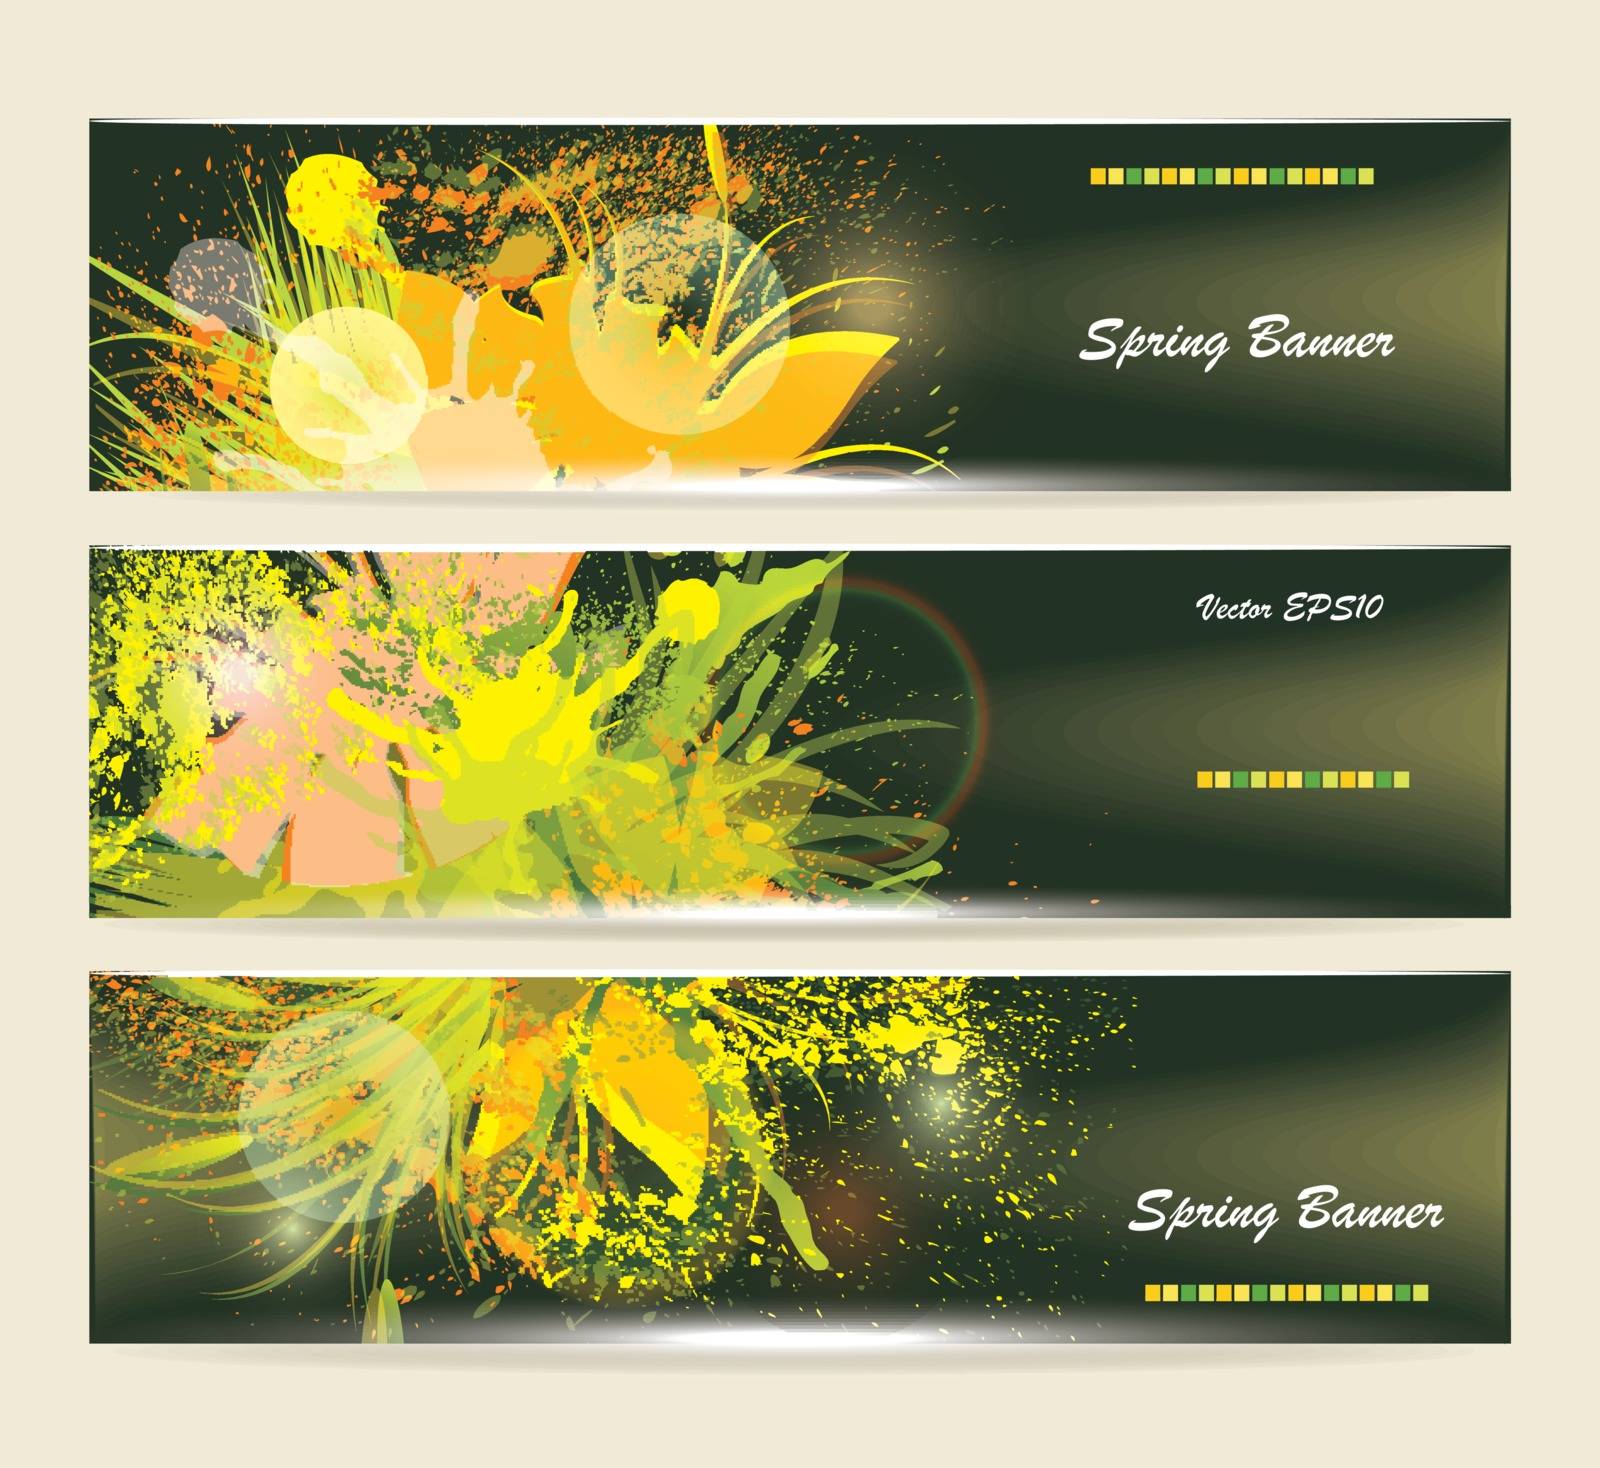 Set of horizontal banners with flowers 